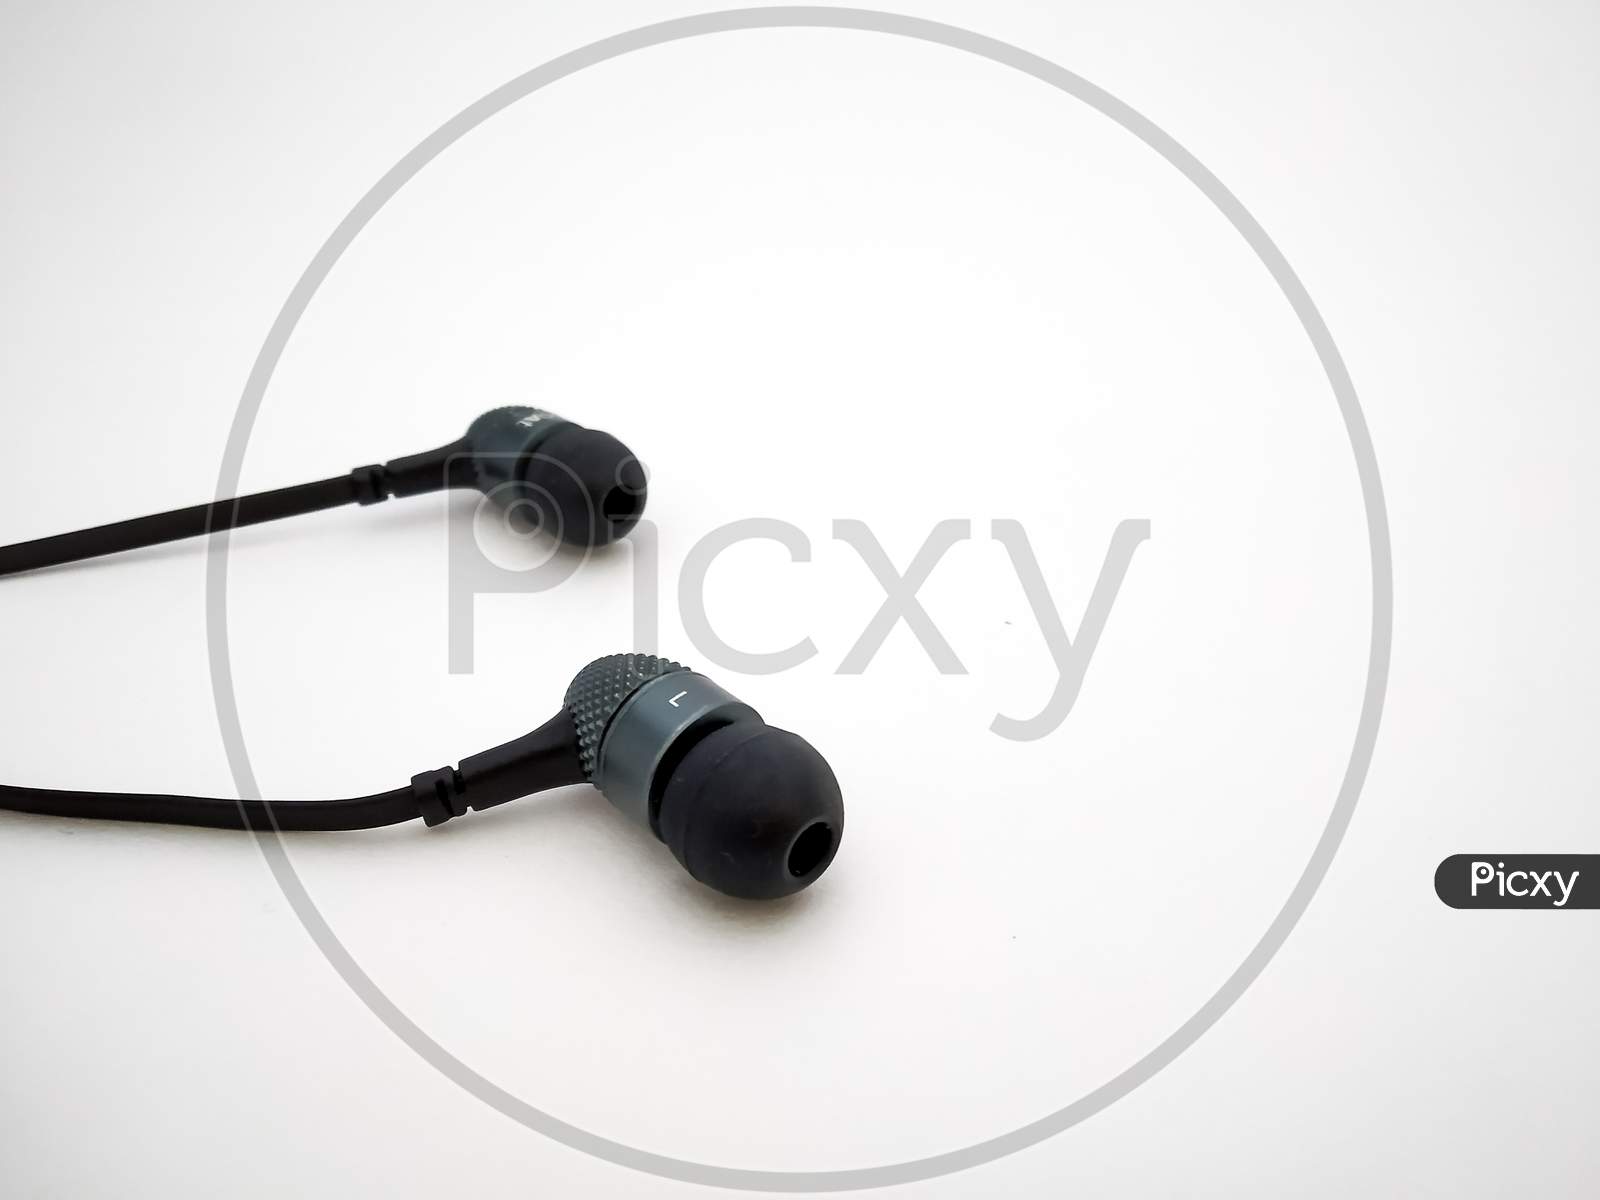 Headphones Earphone Close Up Isolated With White Background